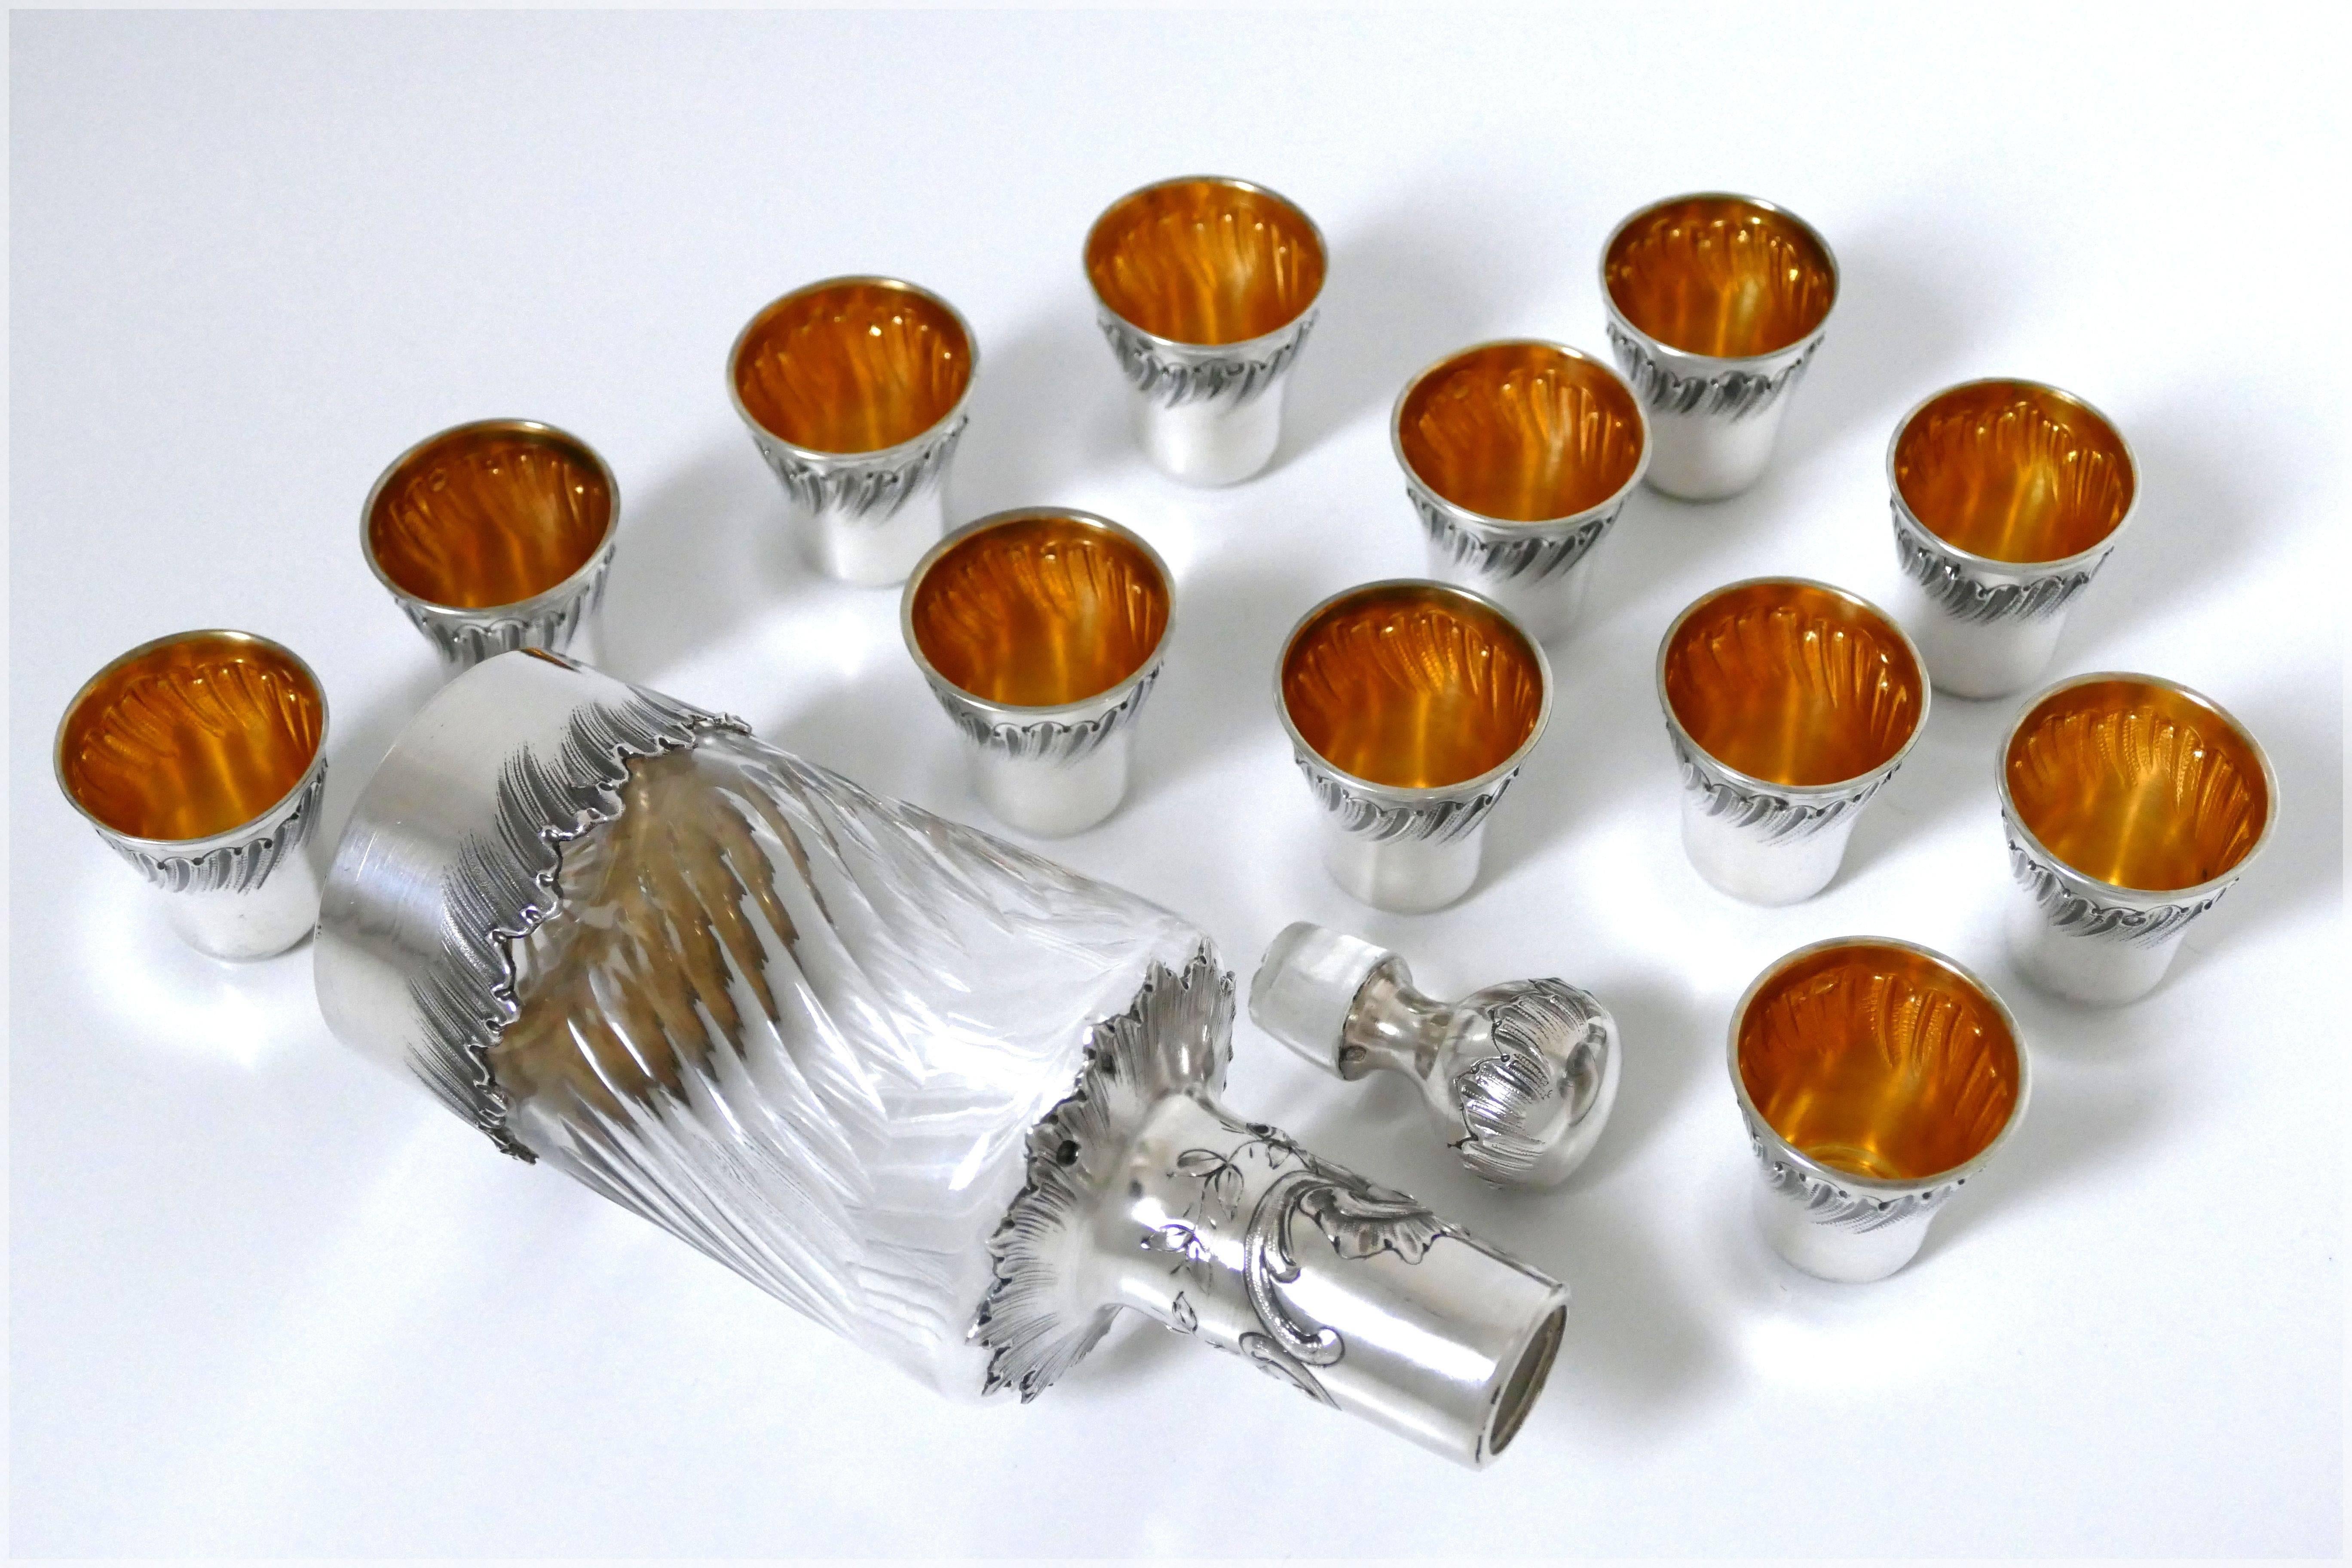 Late 19th Century Rare French Sterling Silver 18-Karat Gold Liquor Cups and Decanter, Original Box